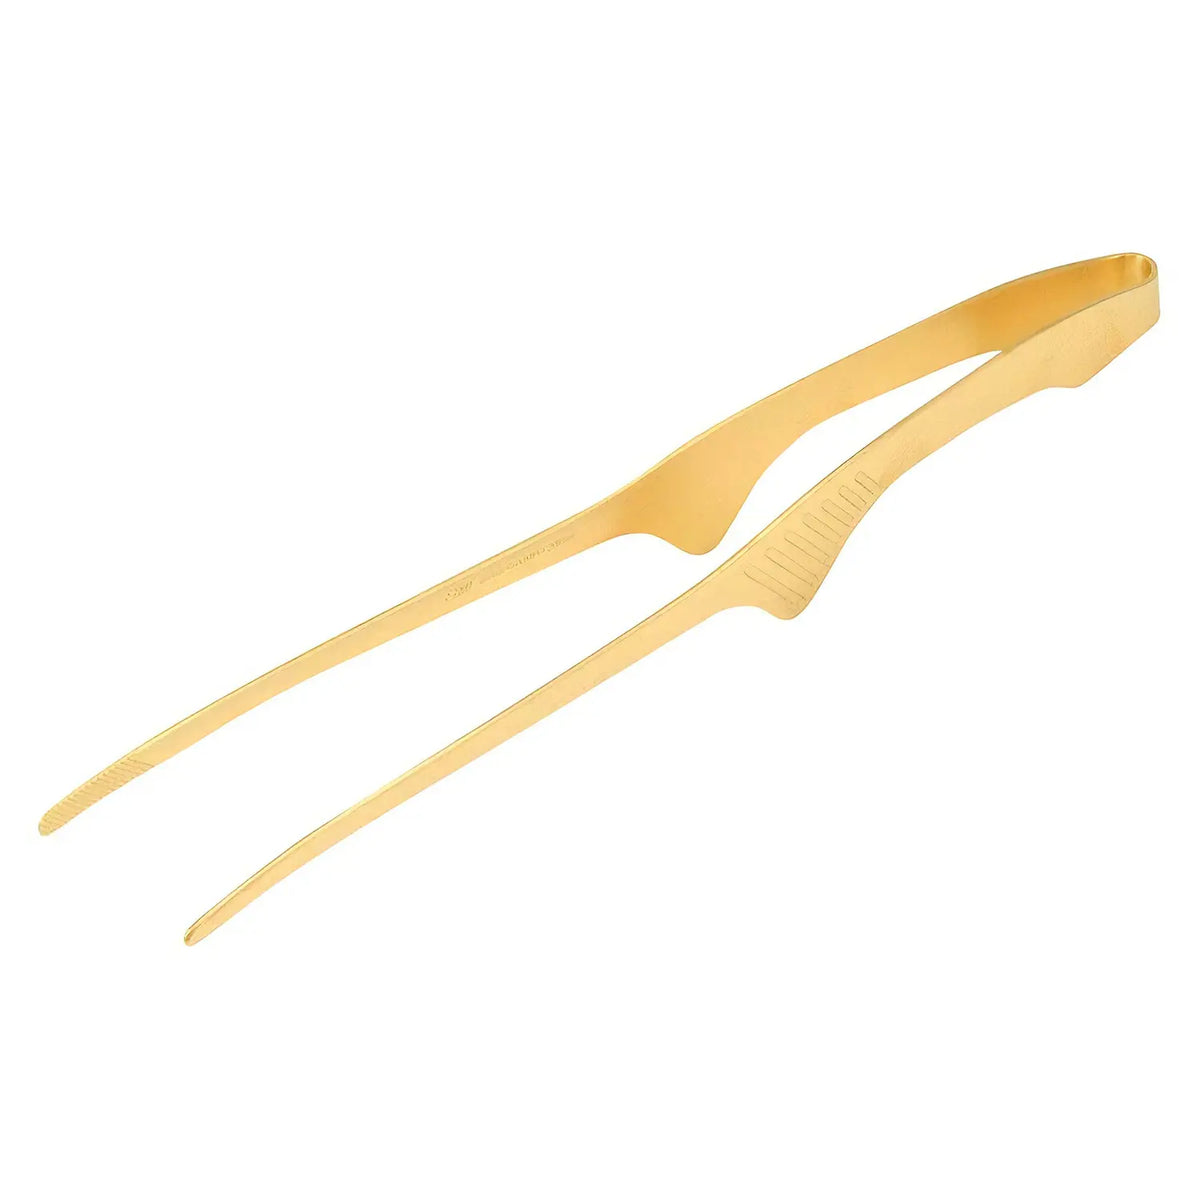 Todai Stainless Steel Clever Chopstick Tongs